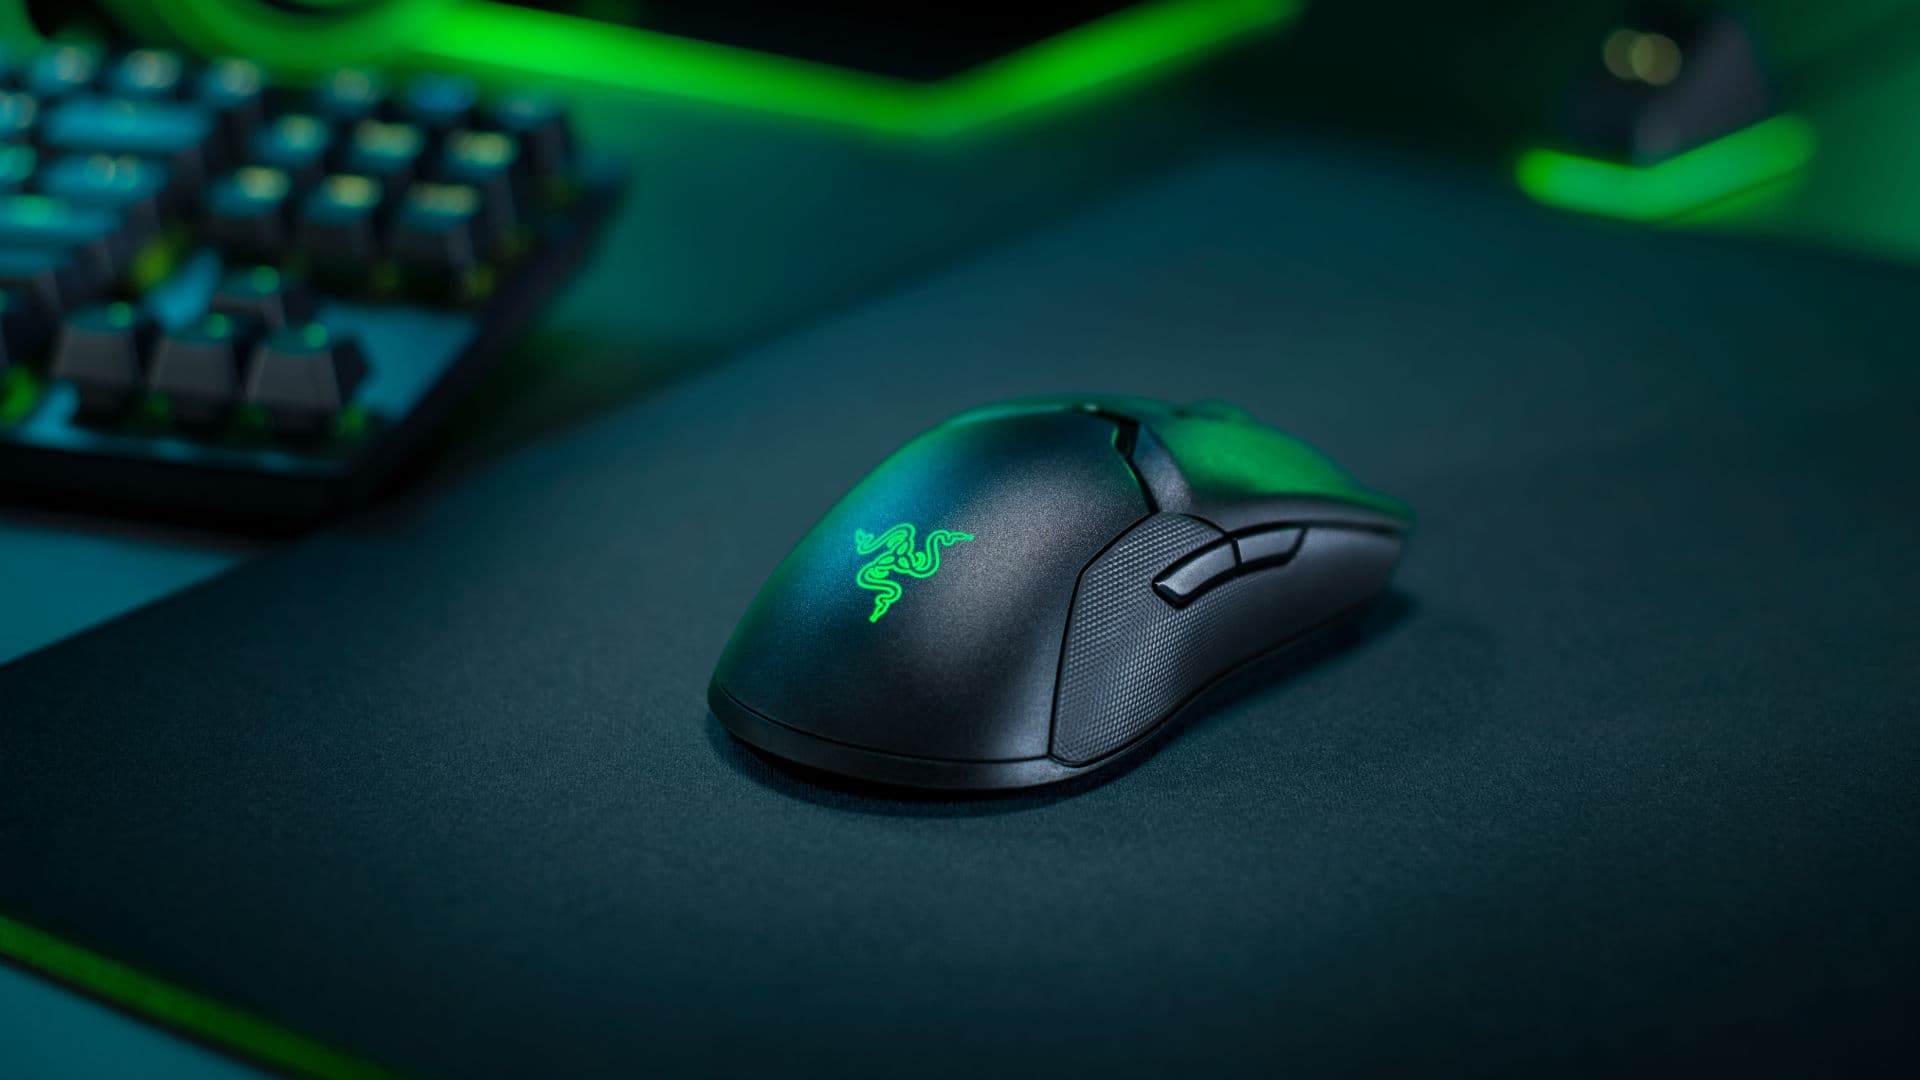 Top 5 Gaming Mouse under ₹500 in 2020